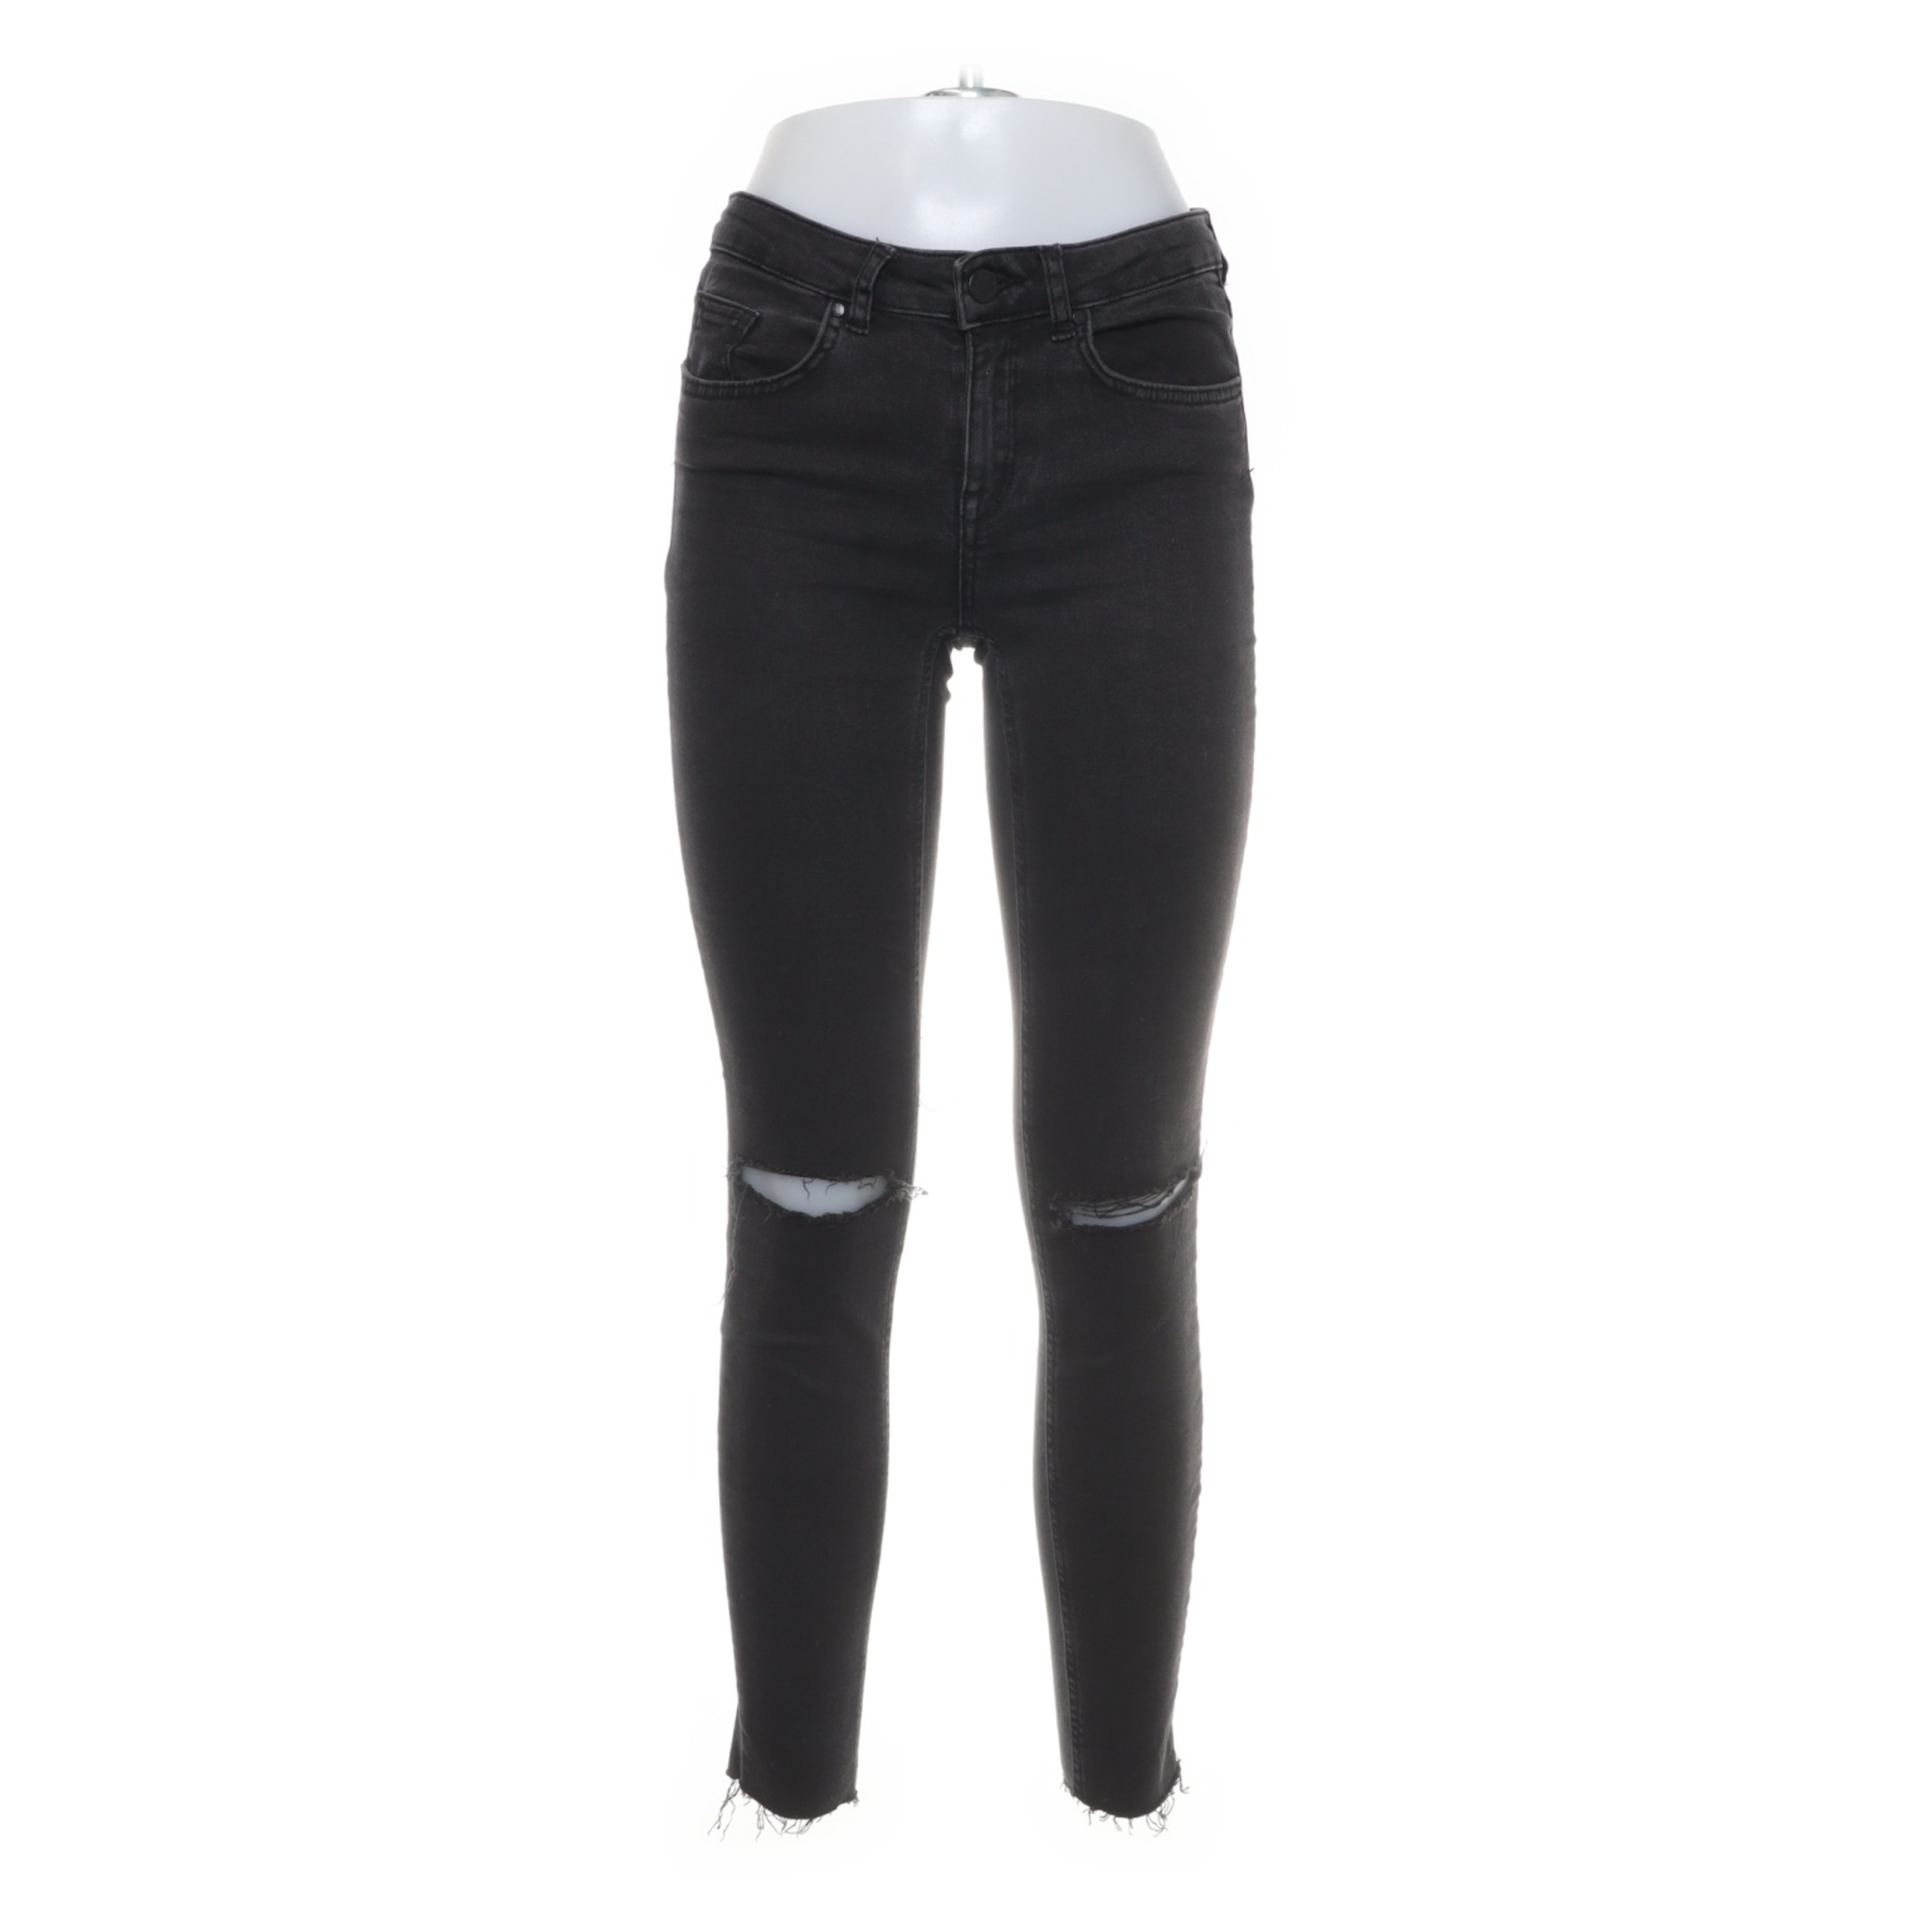 Perfect Jeans Gina Tricot Jeans